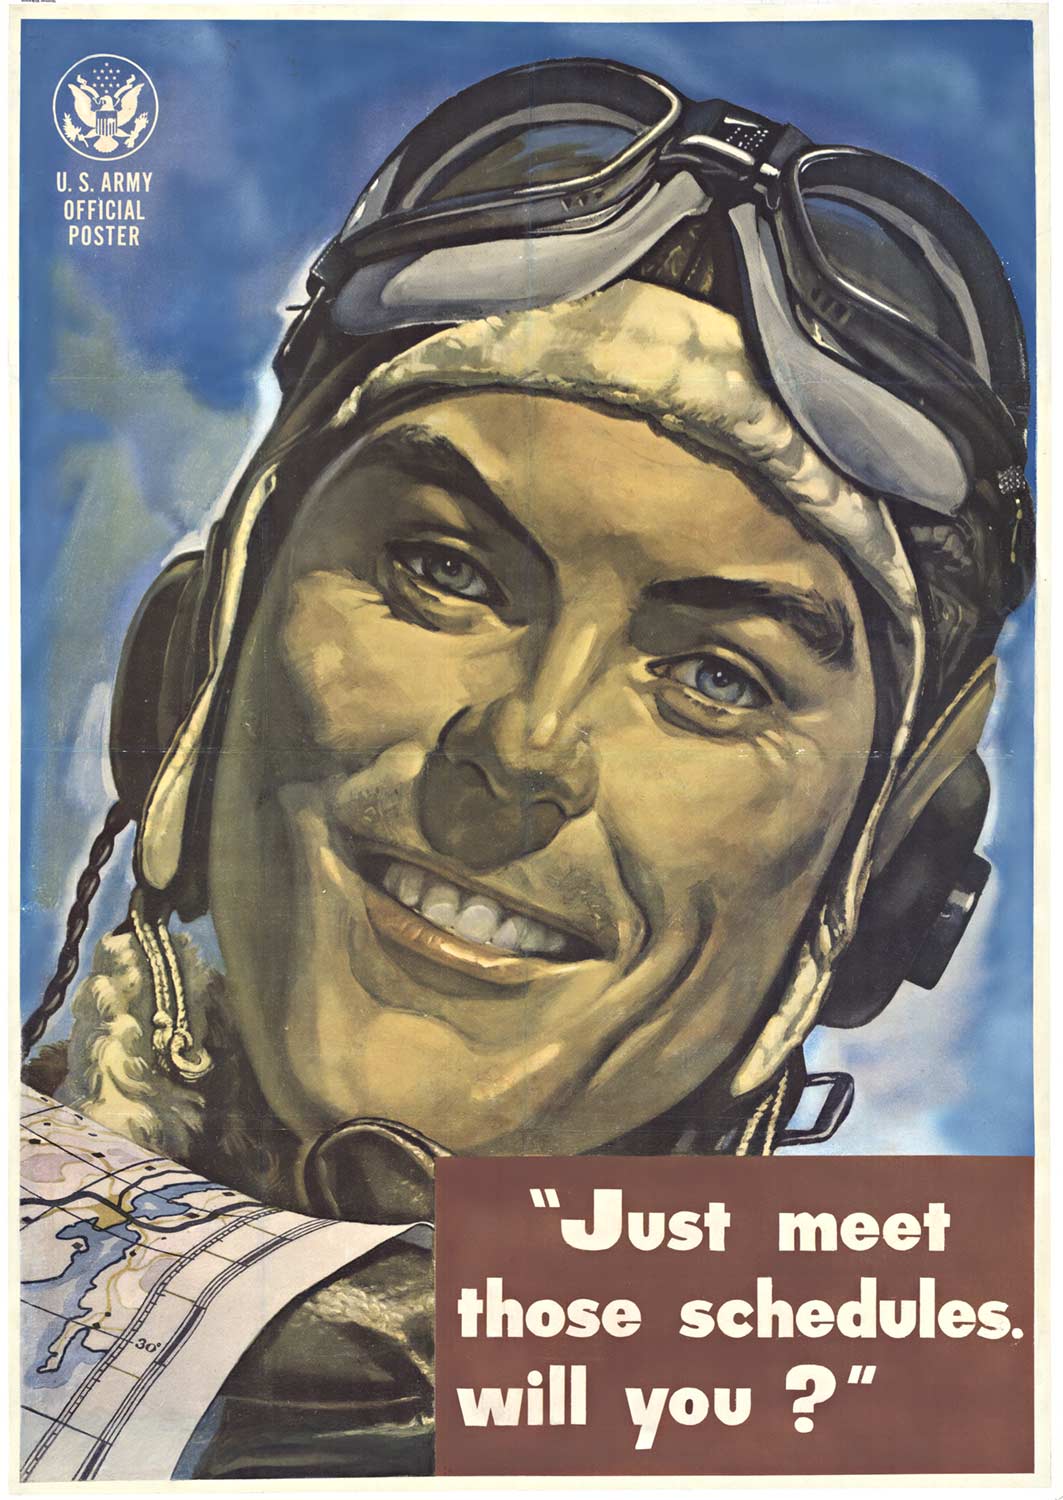 This exclusive vintage World War II poster is a rare and beautiful piece of history. This original and authentic poster is truly a sight to behold, showcasing an iconic image of an Army Air Force pilot donning his classic aviator goggles. Printed on a pre